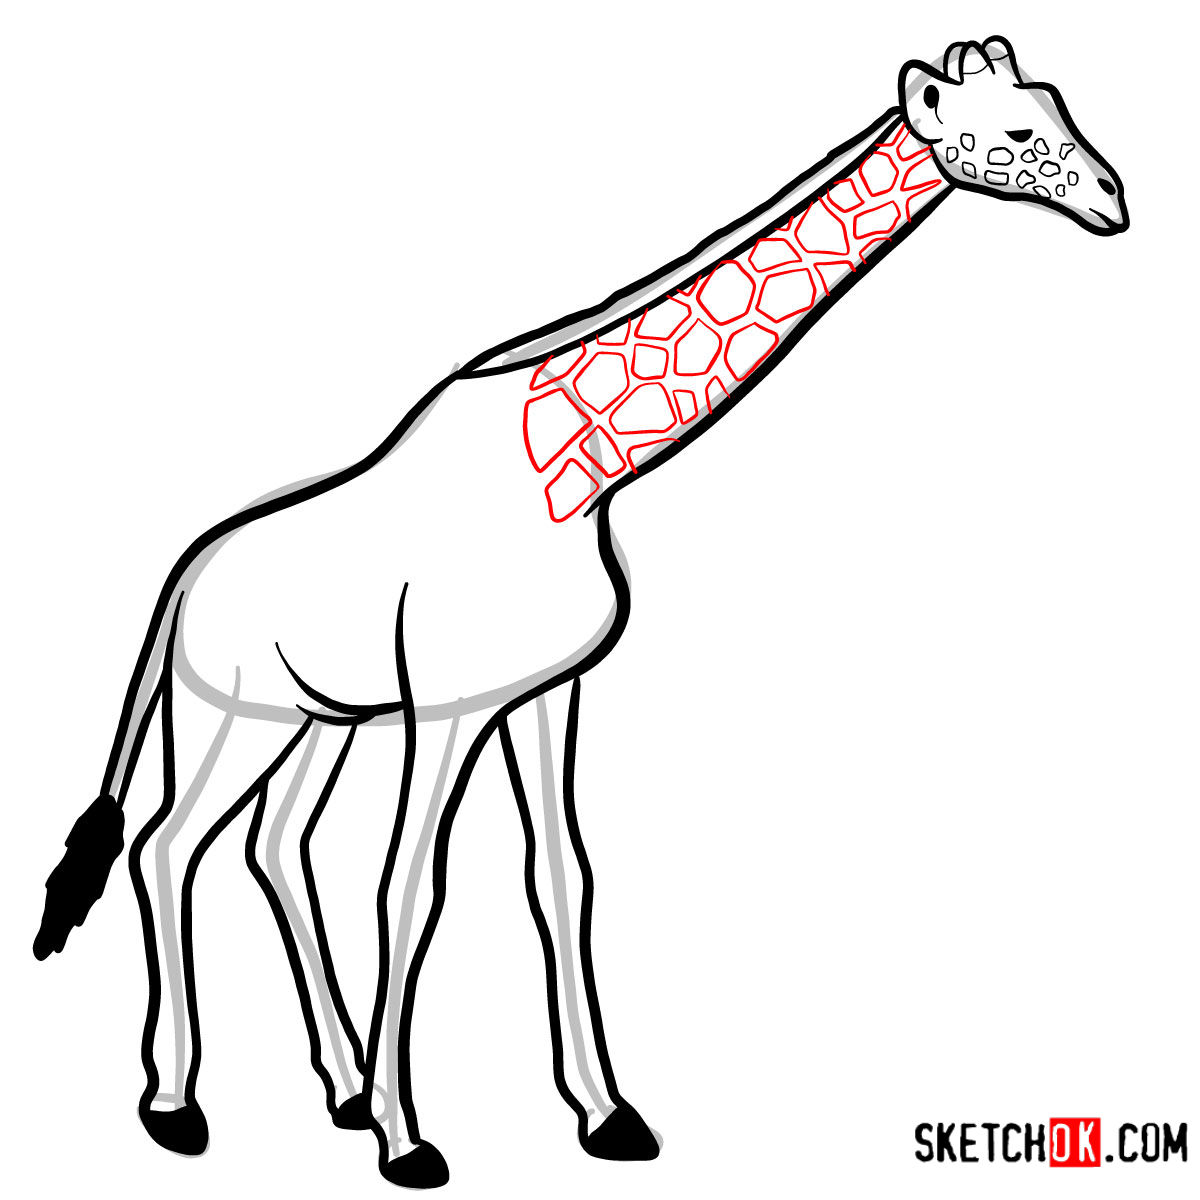 How to draw a Giraffe in full growth | Wild Animals - Sketchok easy drawing  guides